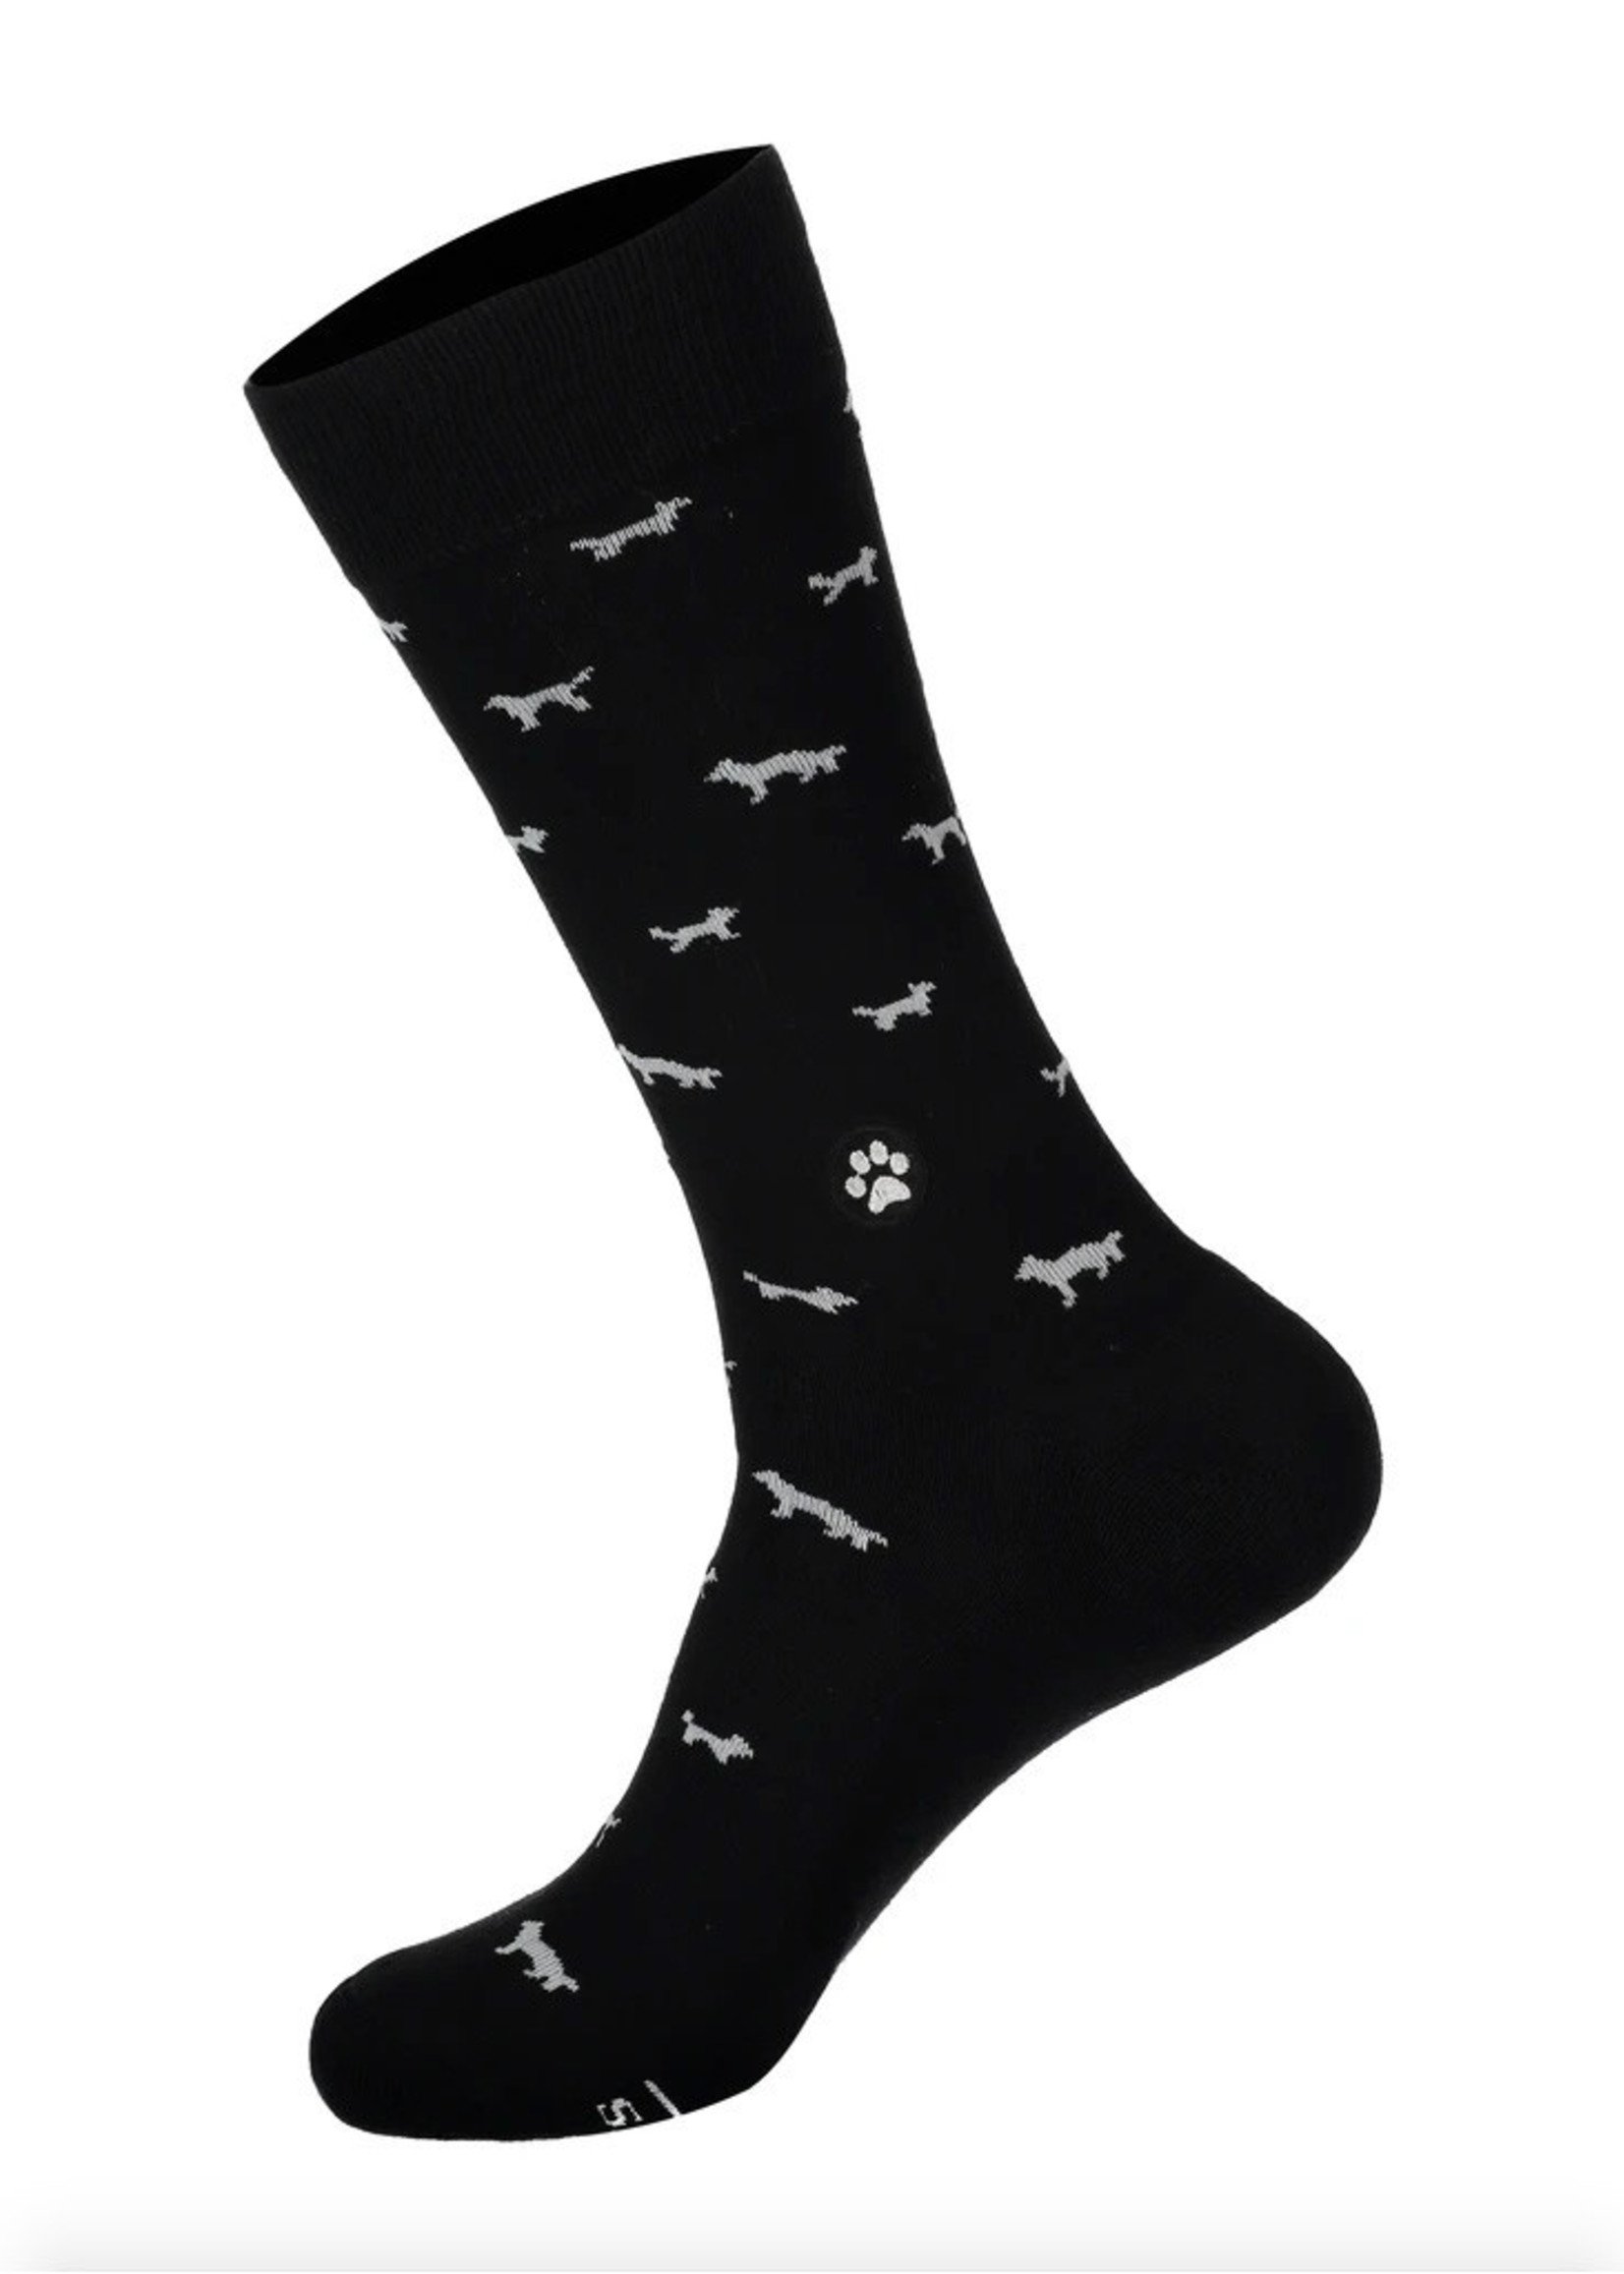 Conscious Step Men's Socks That Save Dogs